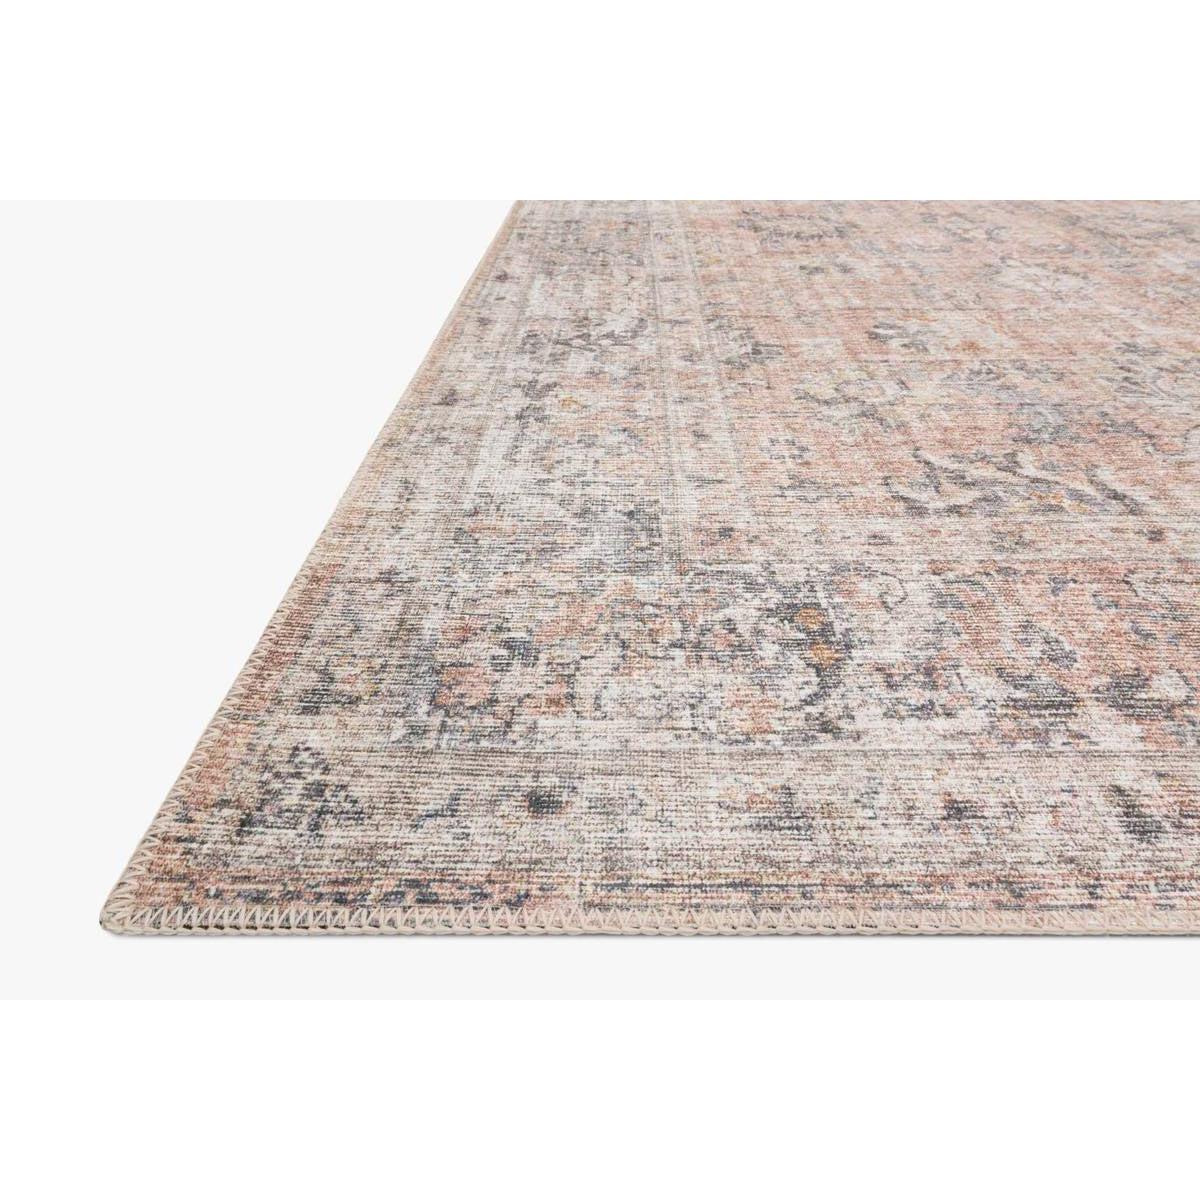 Skye Rug Collection by Loloi -Sky 01-Blush/Grey-Loloi Rugs-Blue Hand Home